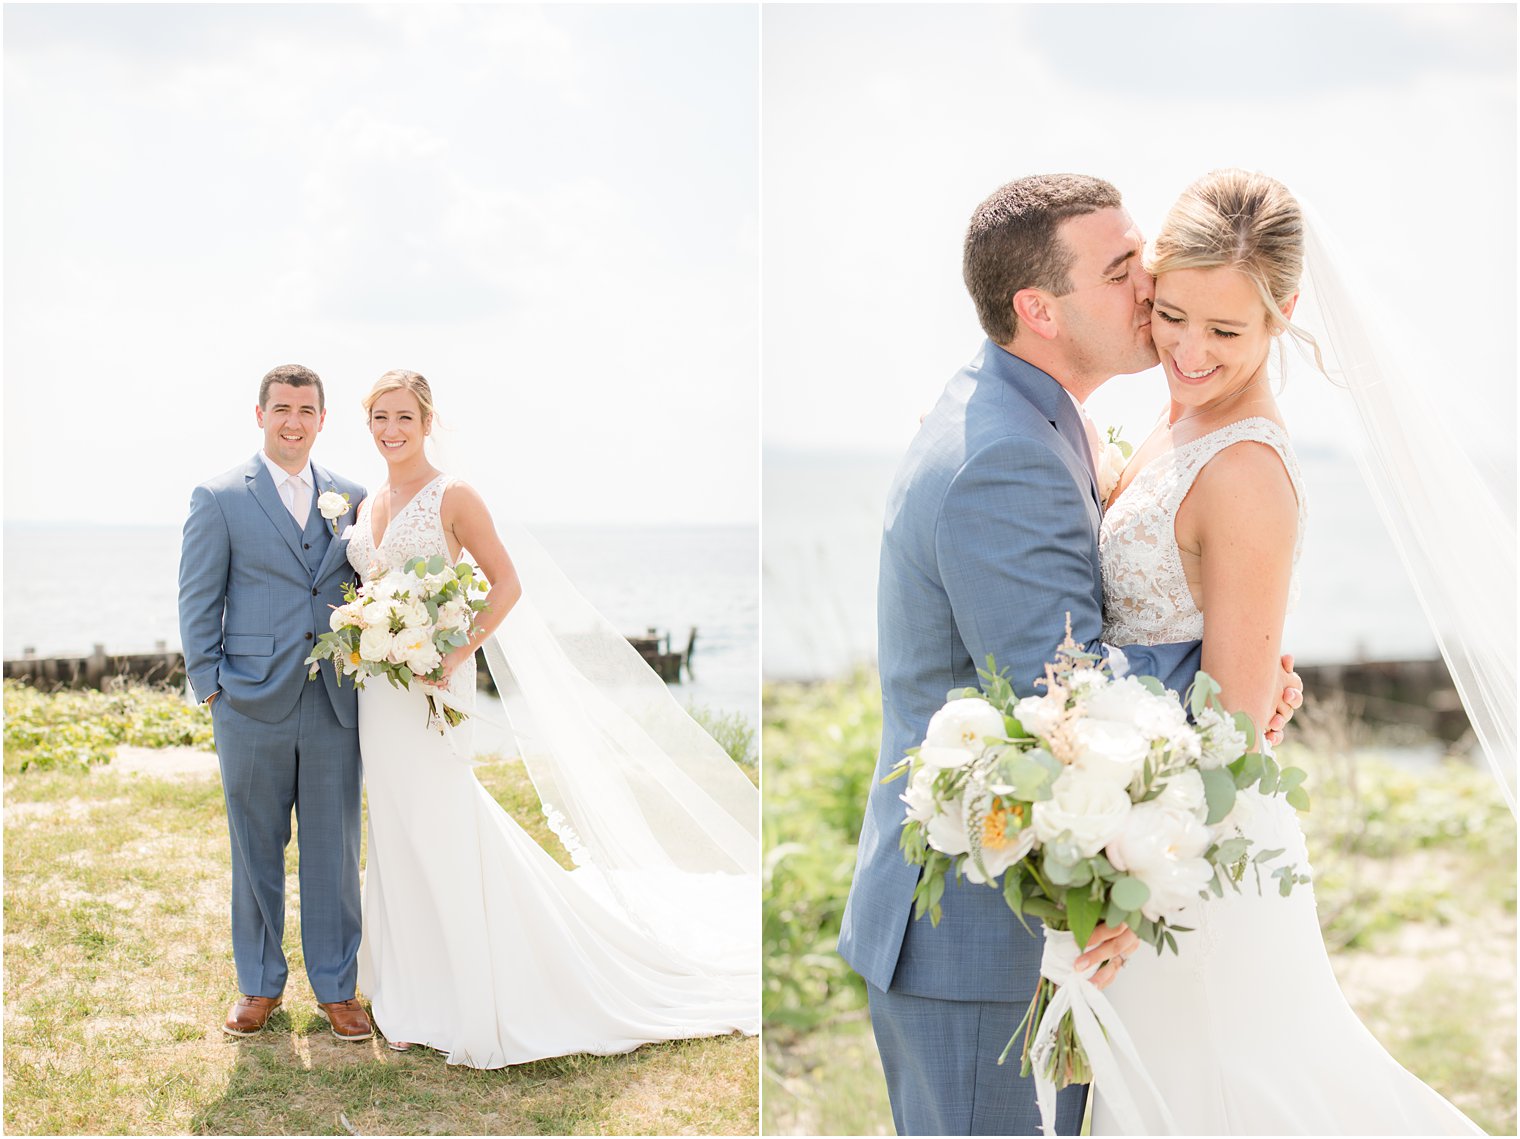 Bride and groom portraits during Sandy Hook Chapel wedding day photographed by Idalia Photography